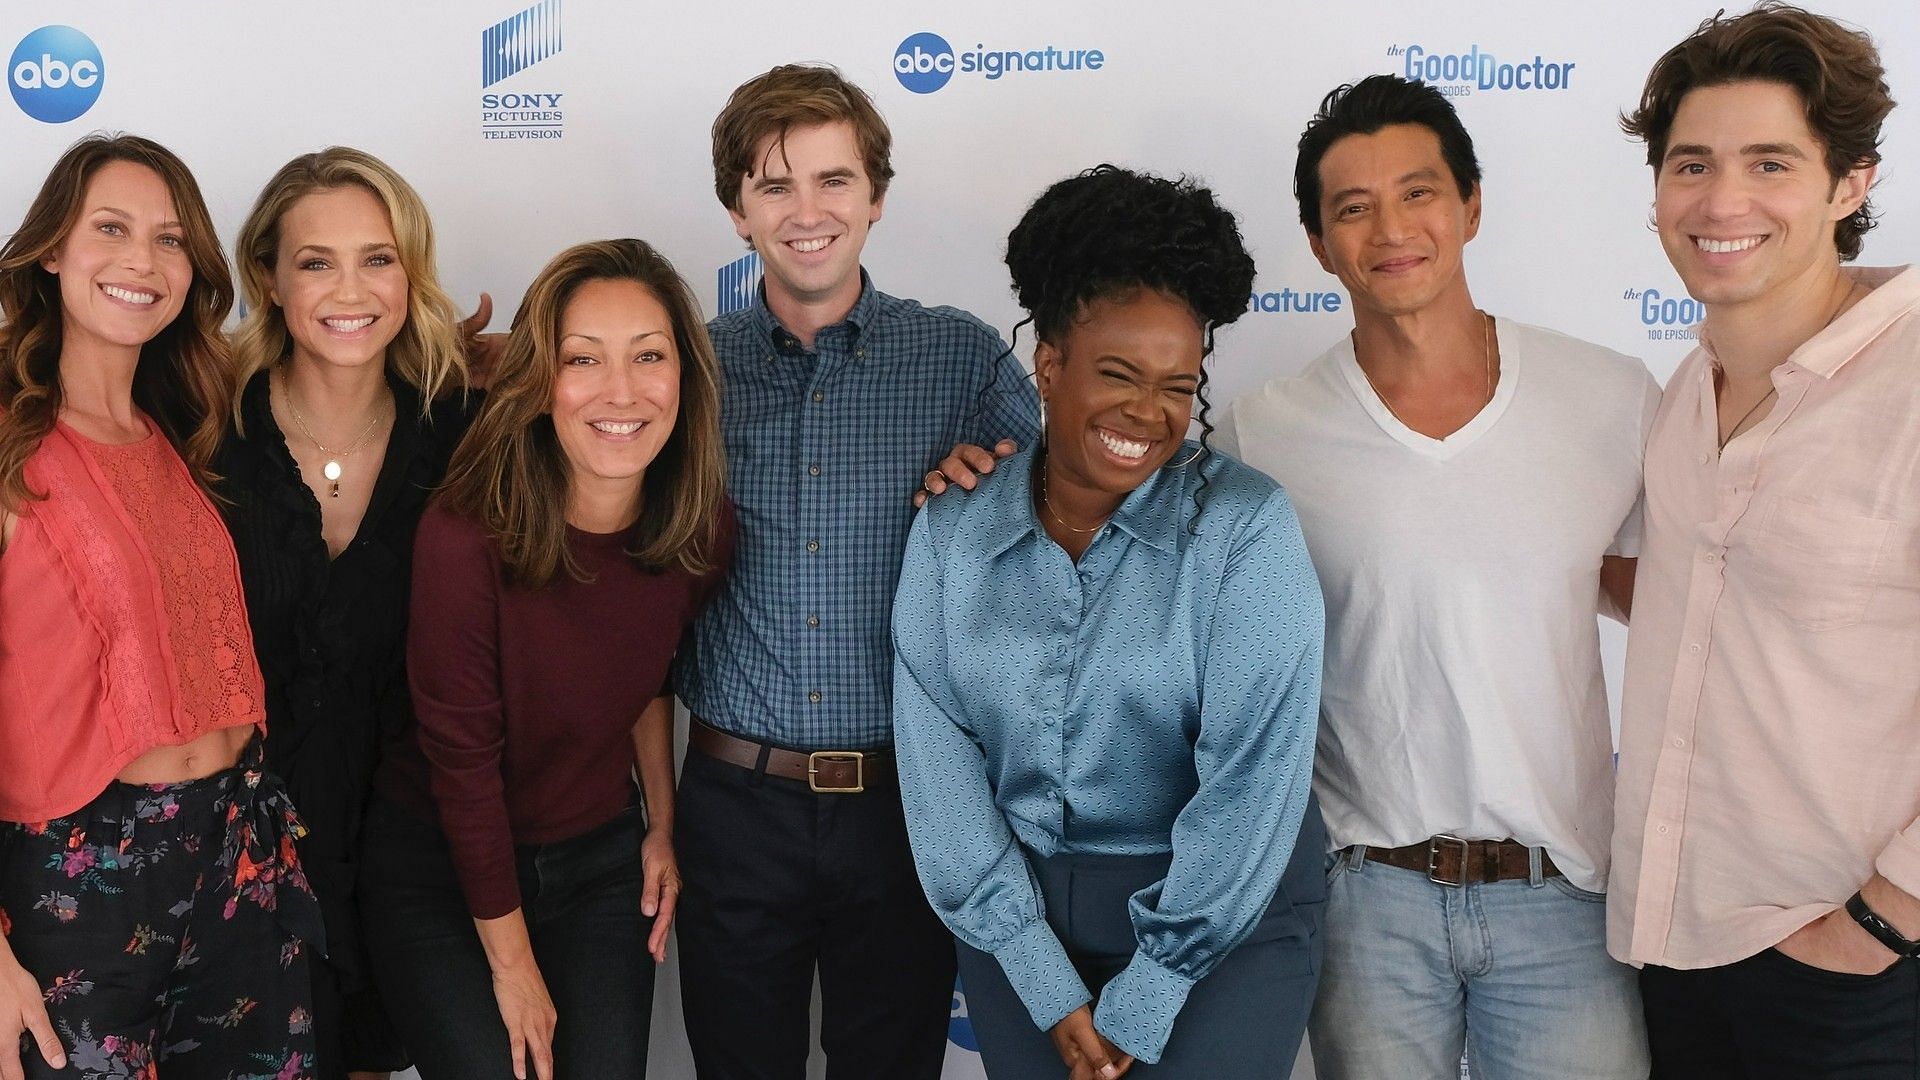 The Good Doctor Season 6 cast additions Meet the 2 new actors joining